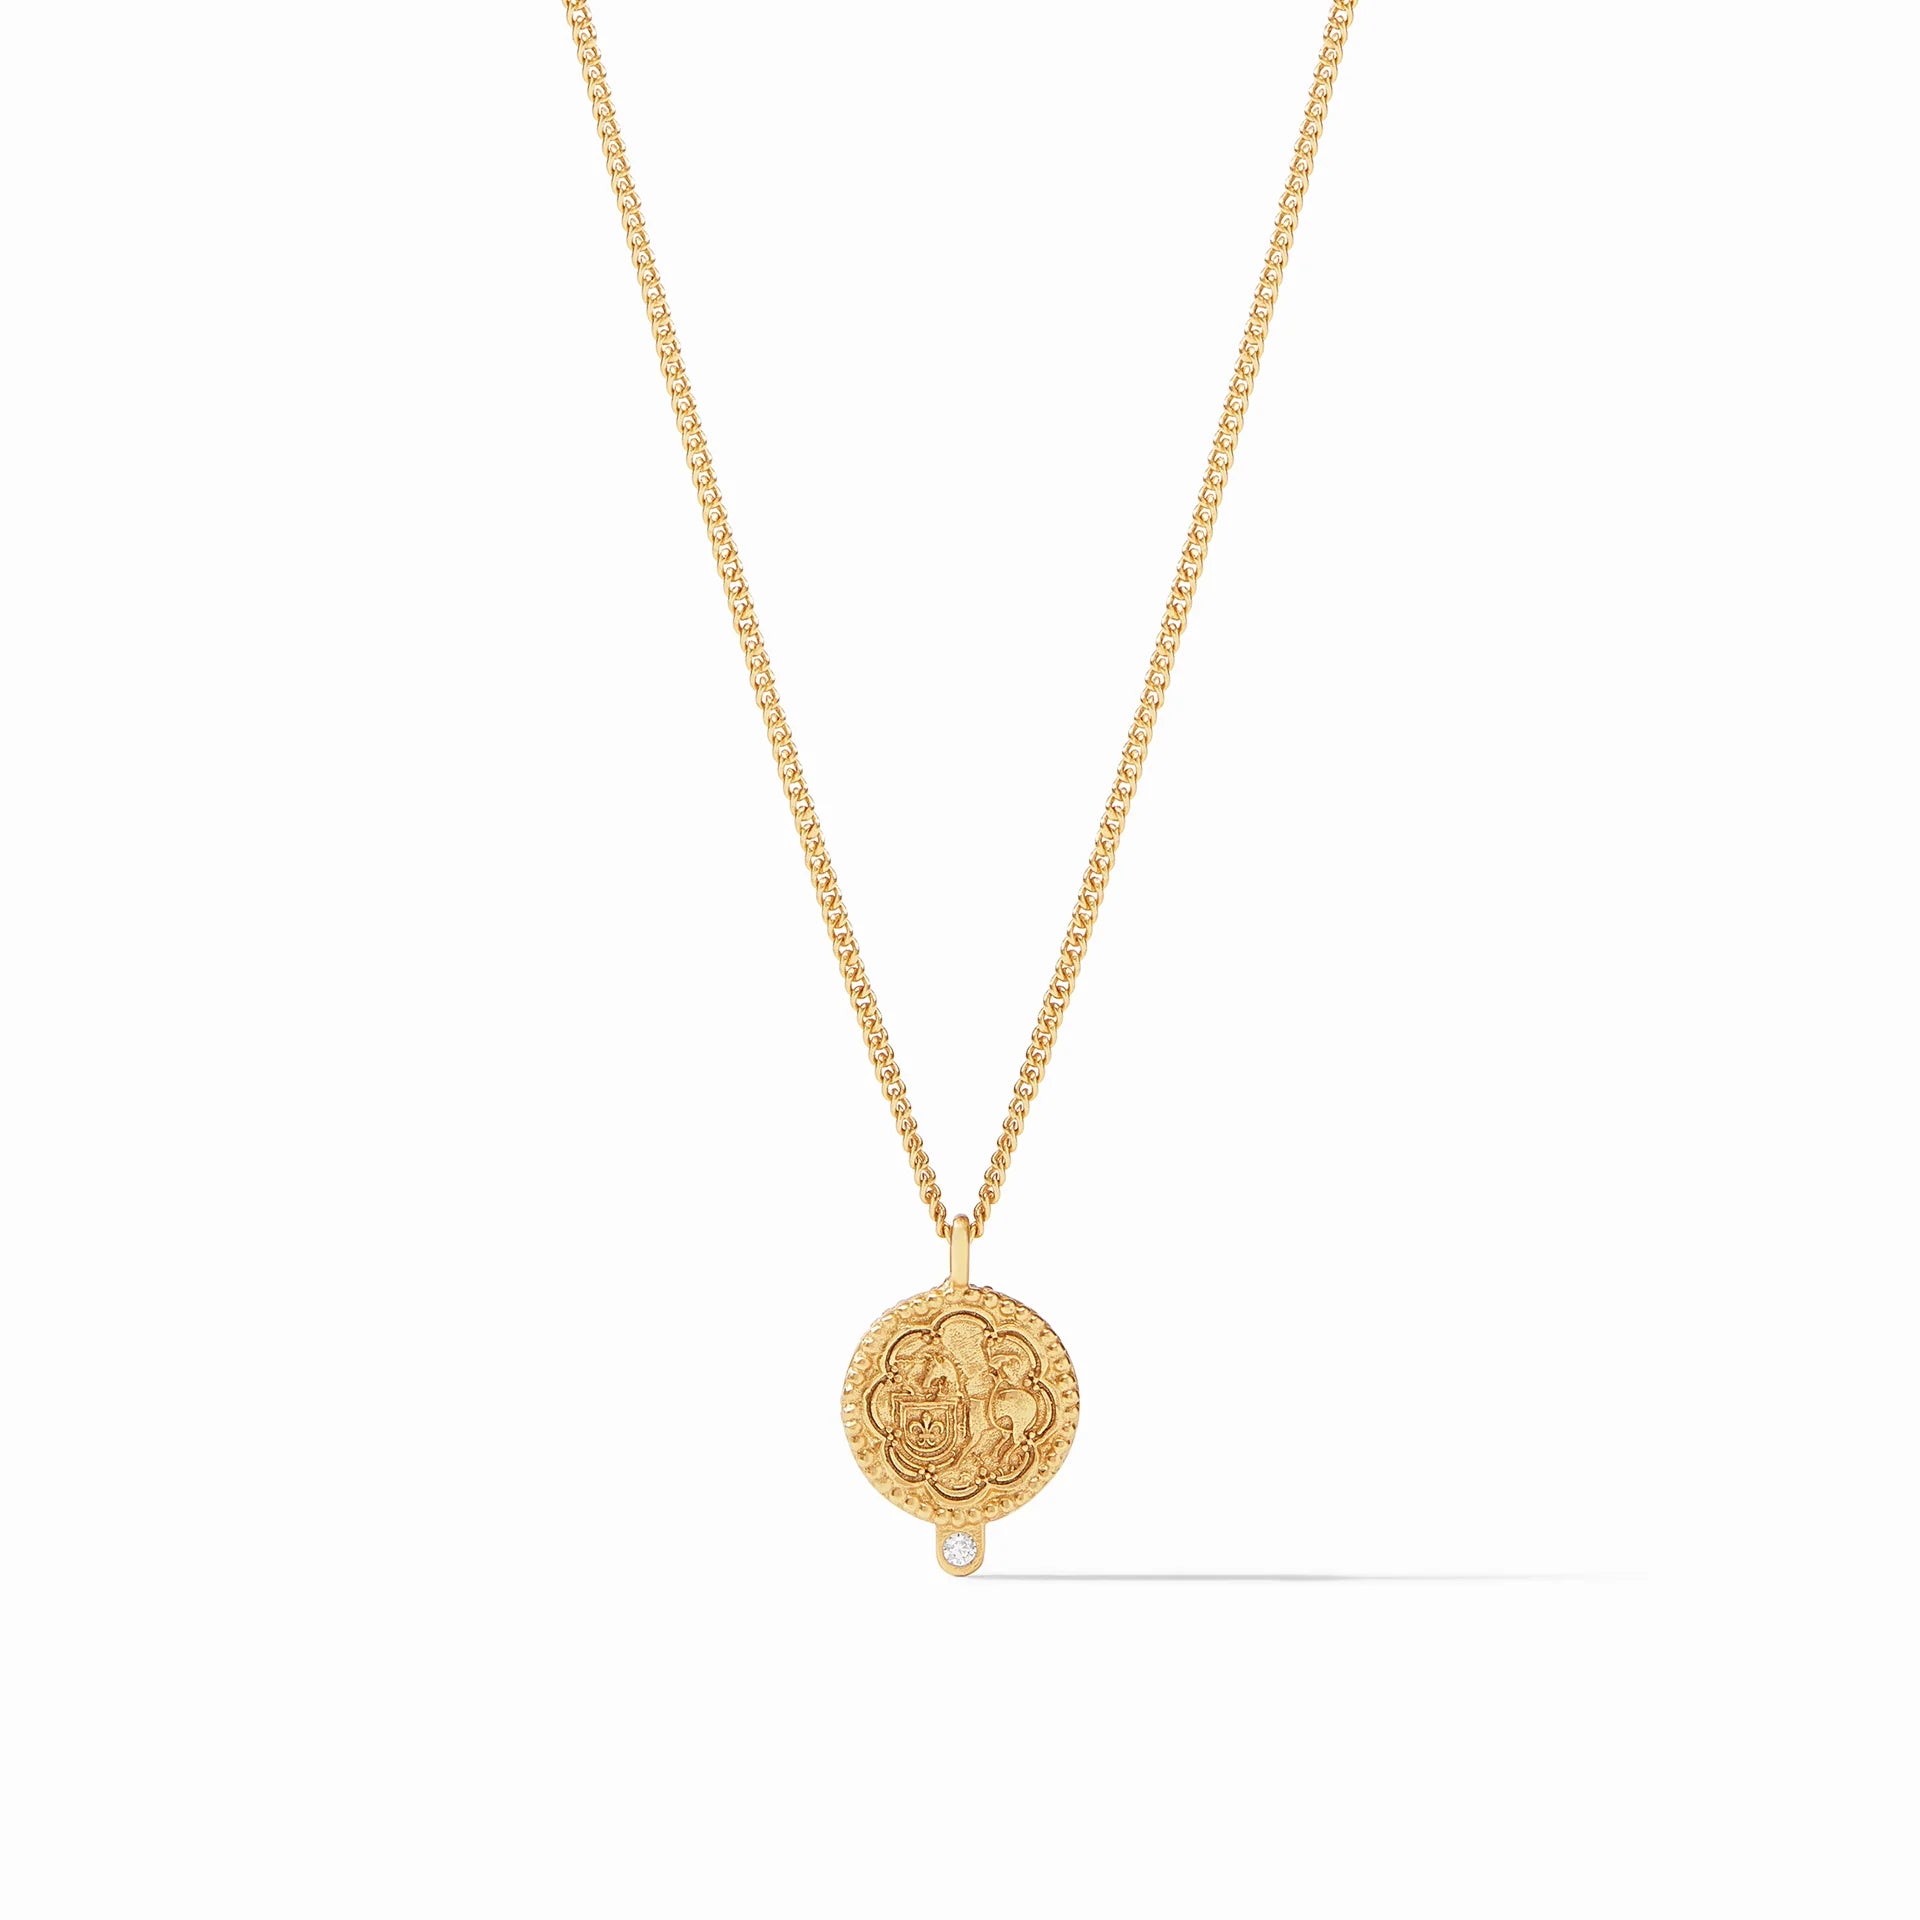 Julie Vos Trieste Coin CZ Solitaire Necklace-Not in Shopify - CJC-Julie Vos-The Village Shoppe, Women’s Fashion Boutique, Shop Online and In Store - Located in Muscle Shoals, AL.